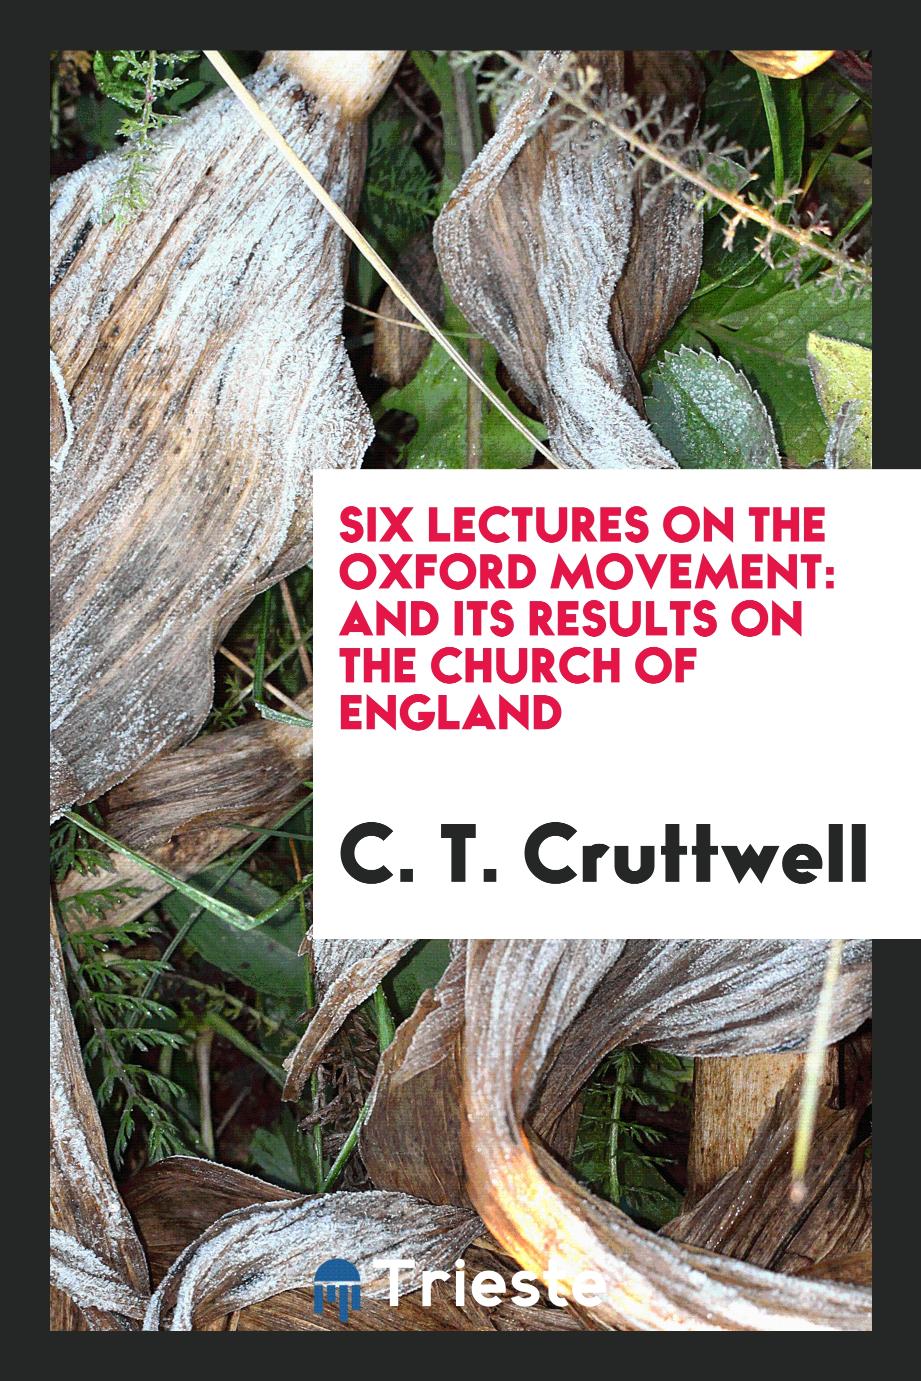 Six lectures on the Oxford movement: and its results on the Church of England